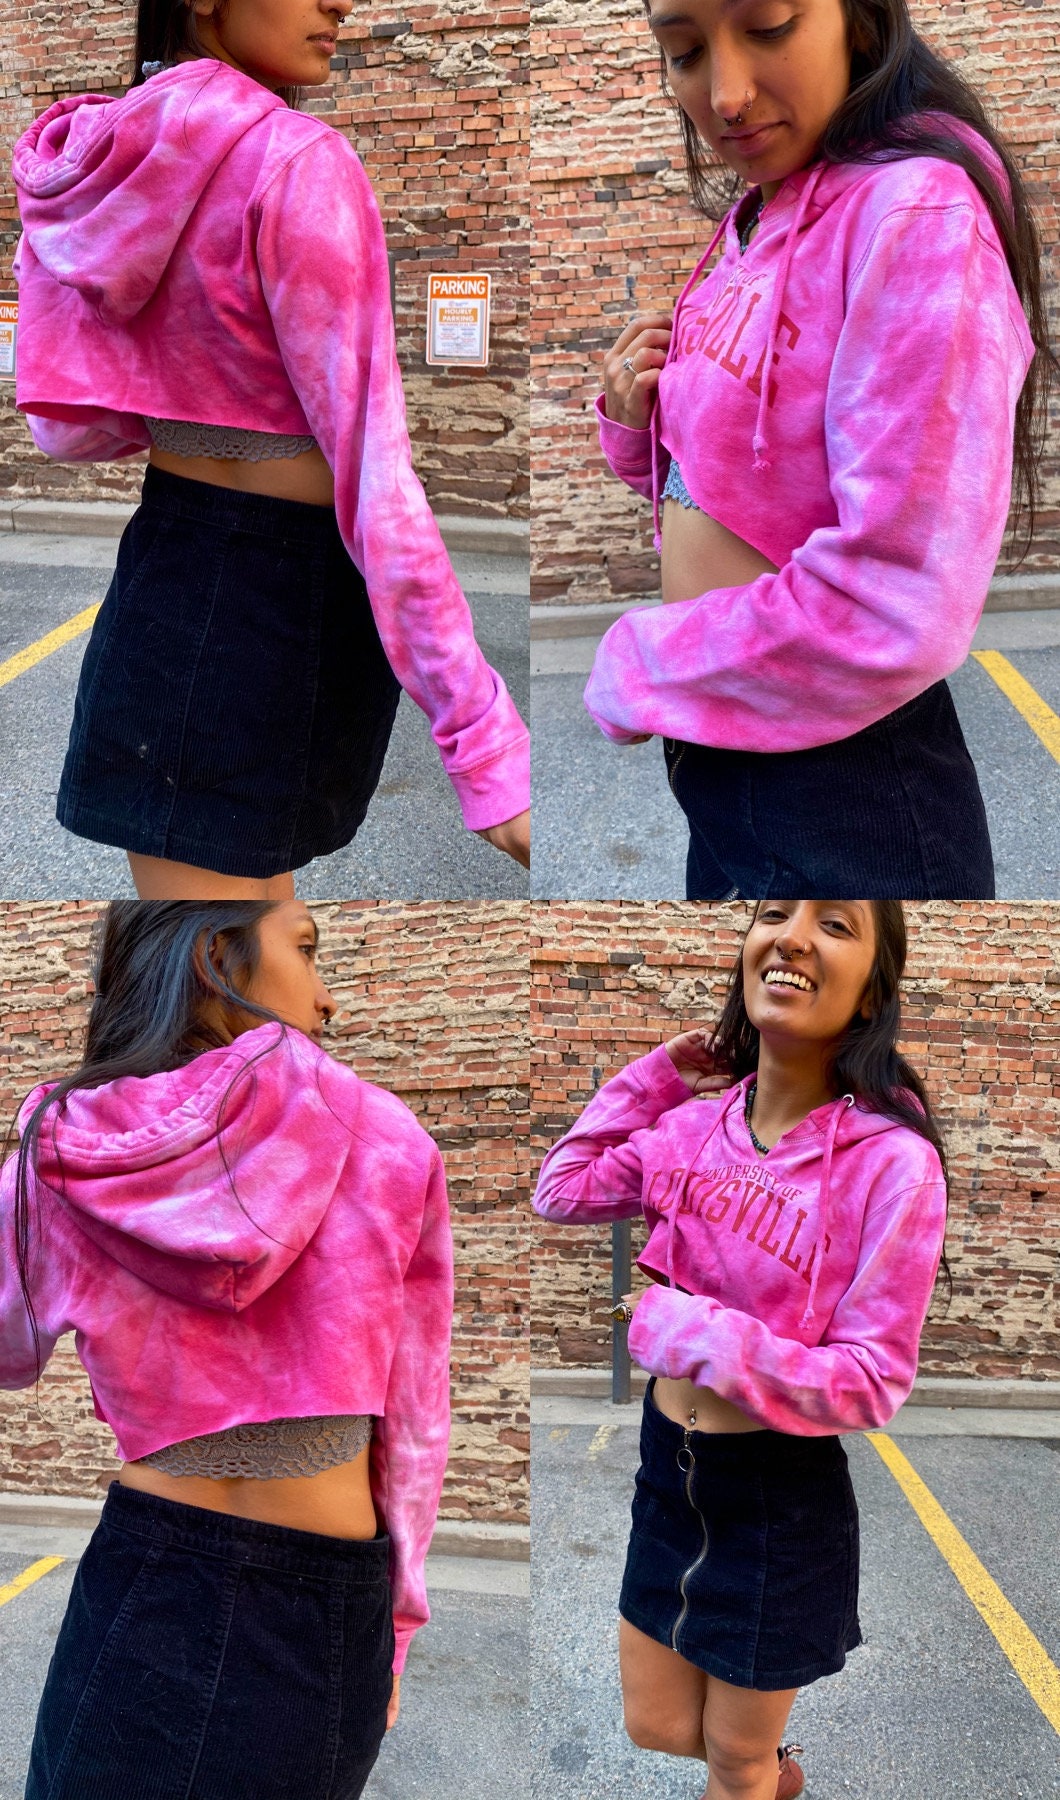 rag2swagg Louisville Cropped Hoodie, Cropped Hoodie, Louisville, Louisville Crop Top, Tie Dyed Crop Top, Tie Dyed Sweatshirt, Tie Dyed College Top